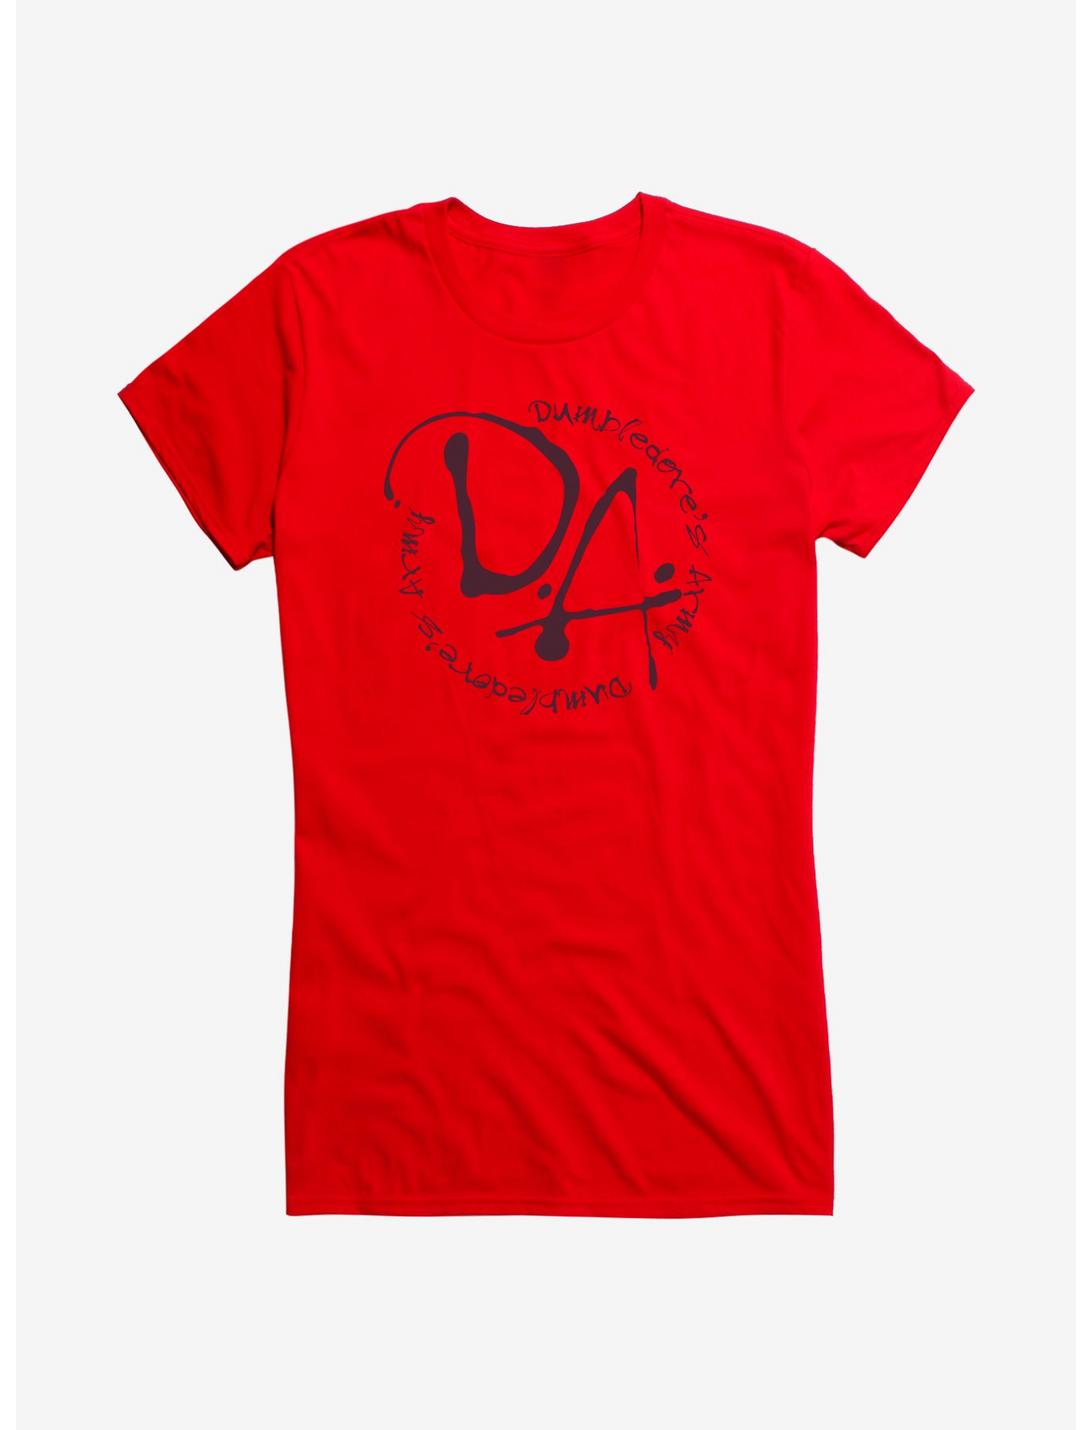 Harry Potter Dumbledore's Army Logo Girls T-Shirt, RED, hi-res